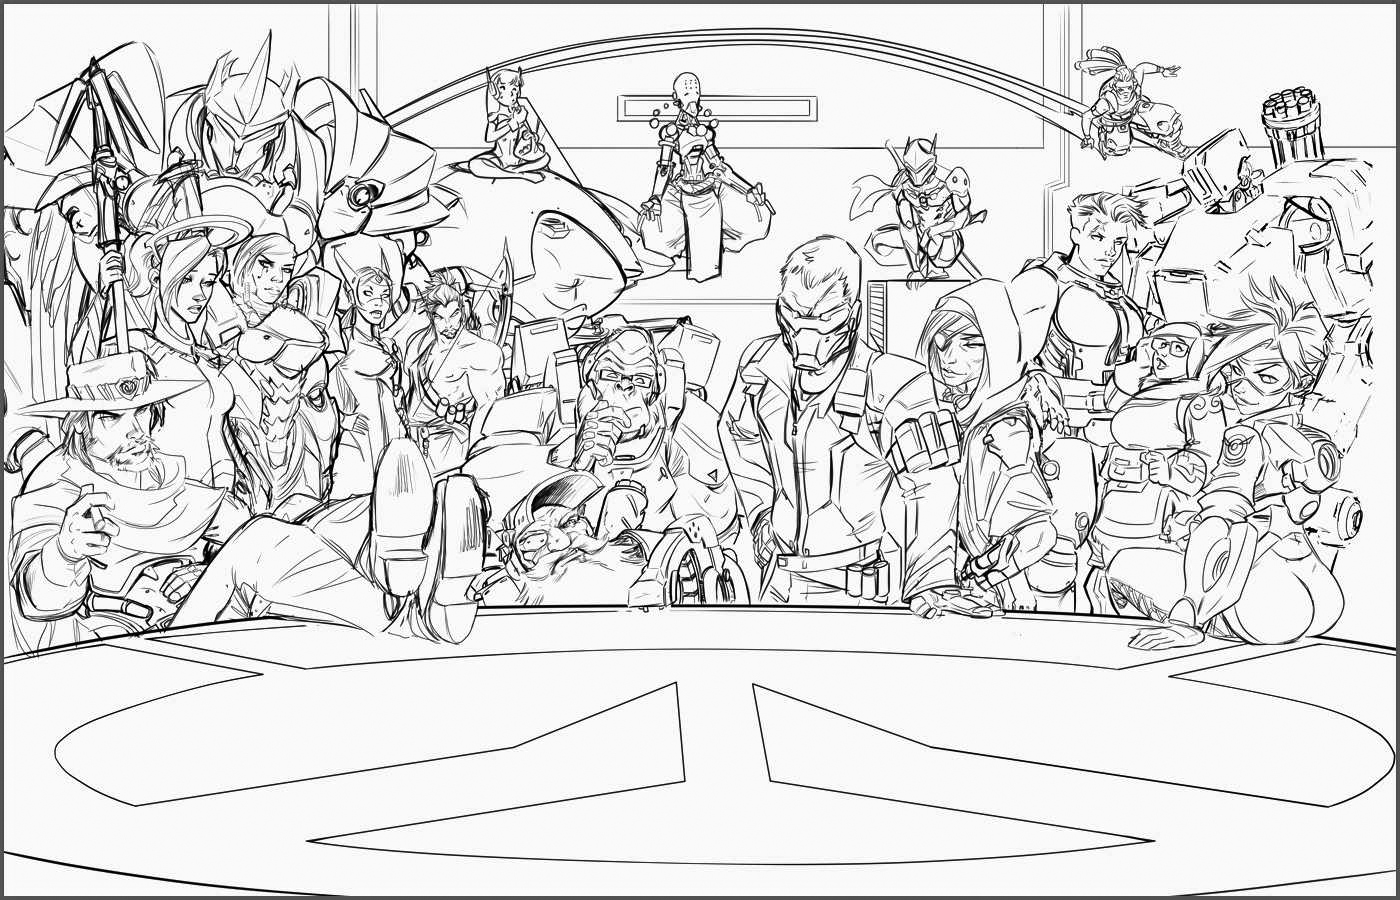 Overwatch Coloring Pages - Best Coloring Pages For Kids